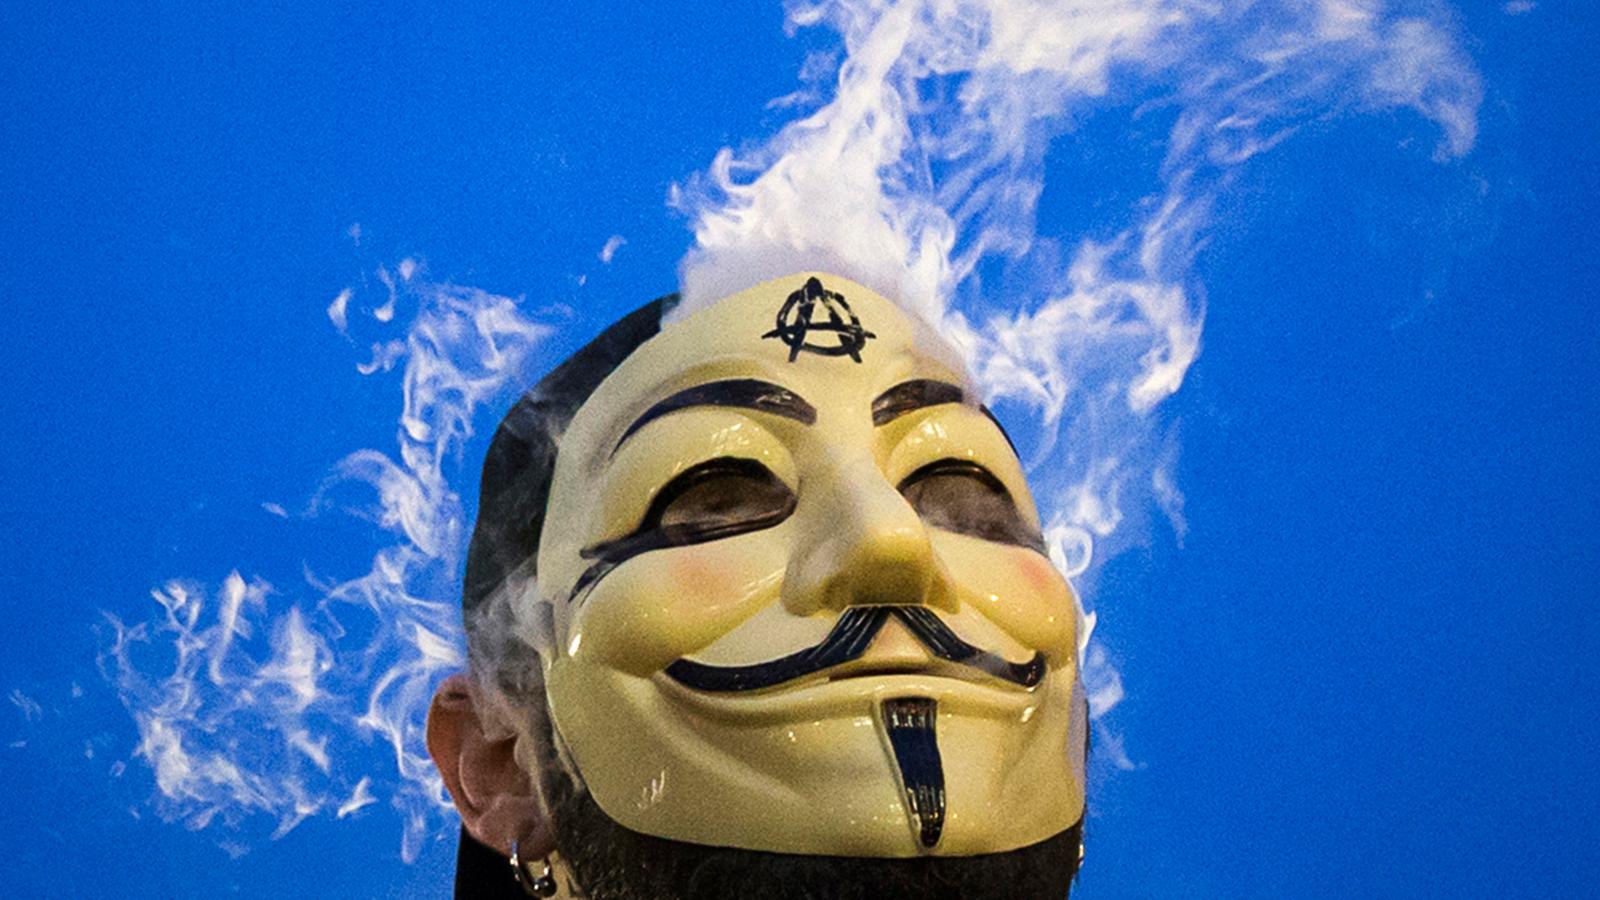 A man in a Guy Fawkes mask smokes while joining supporters of the Anonymous movement taking part in the global "Million Mask March" protests in New York, on November 5, 2014.